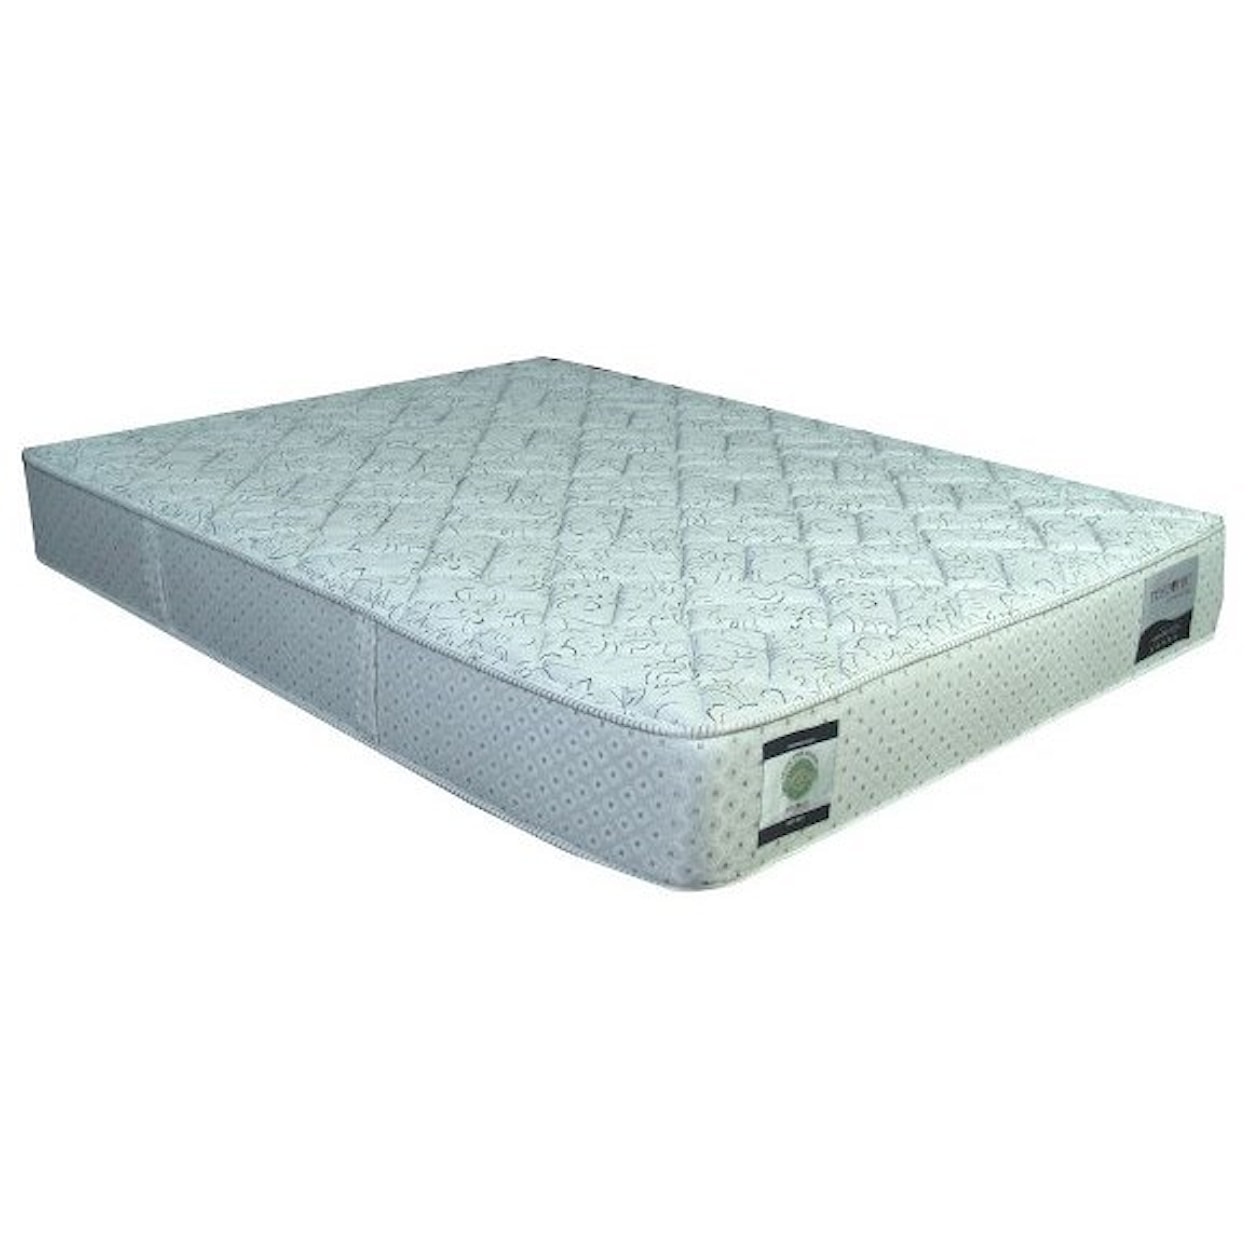 Restonic CC Linwood Firm Twin 12" Firm Two Sided Mattress